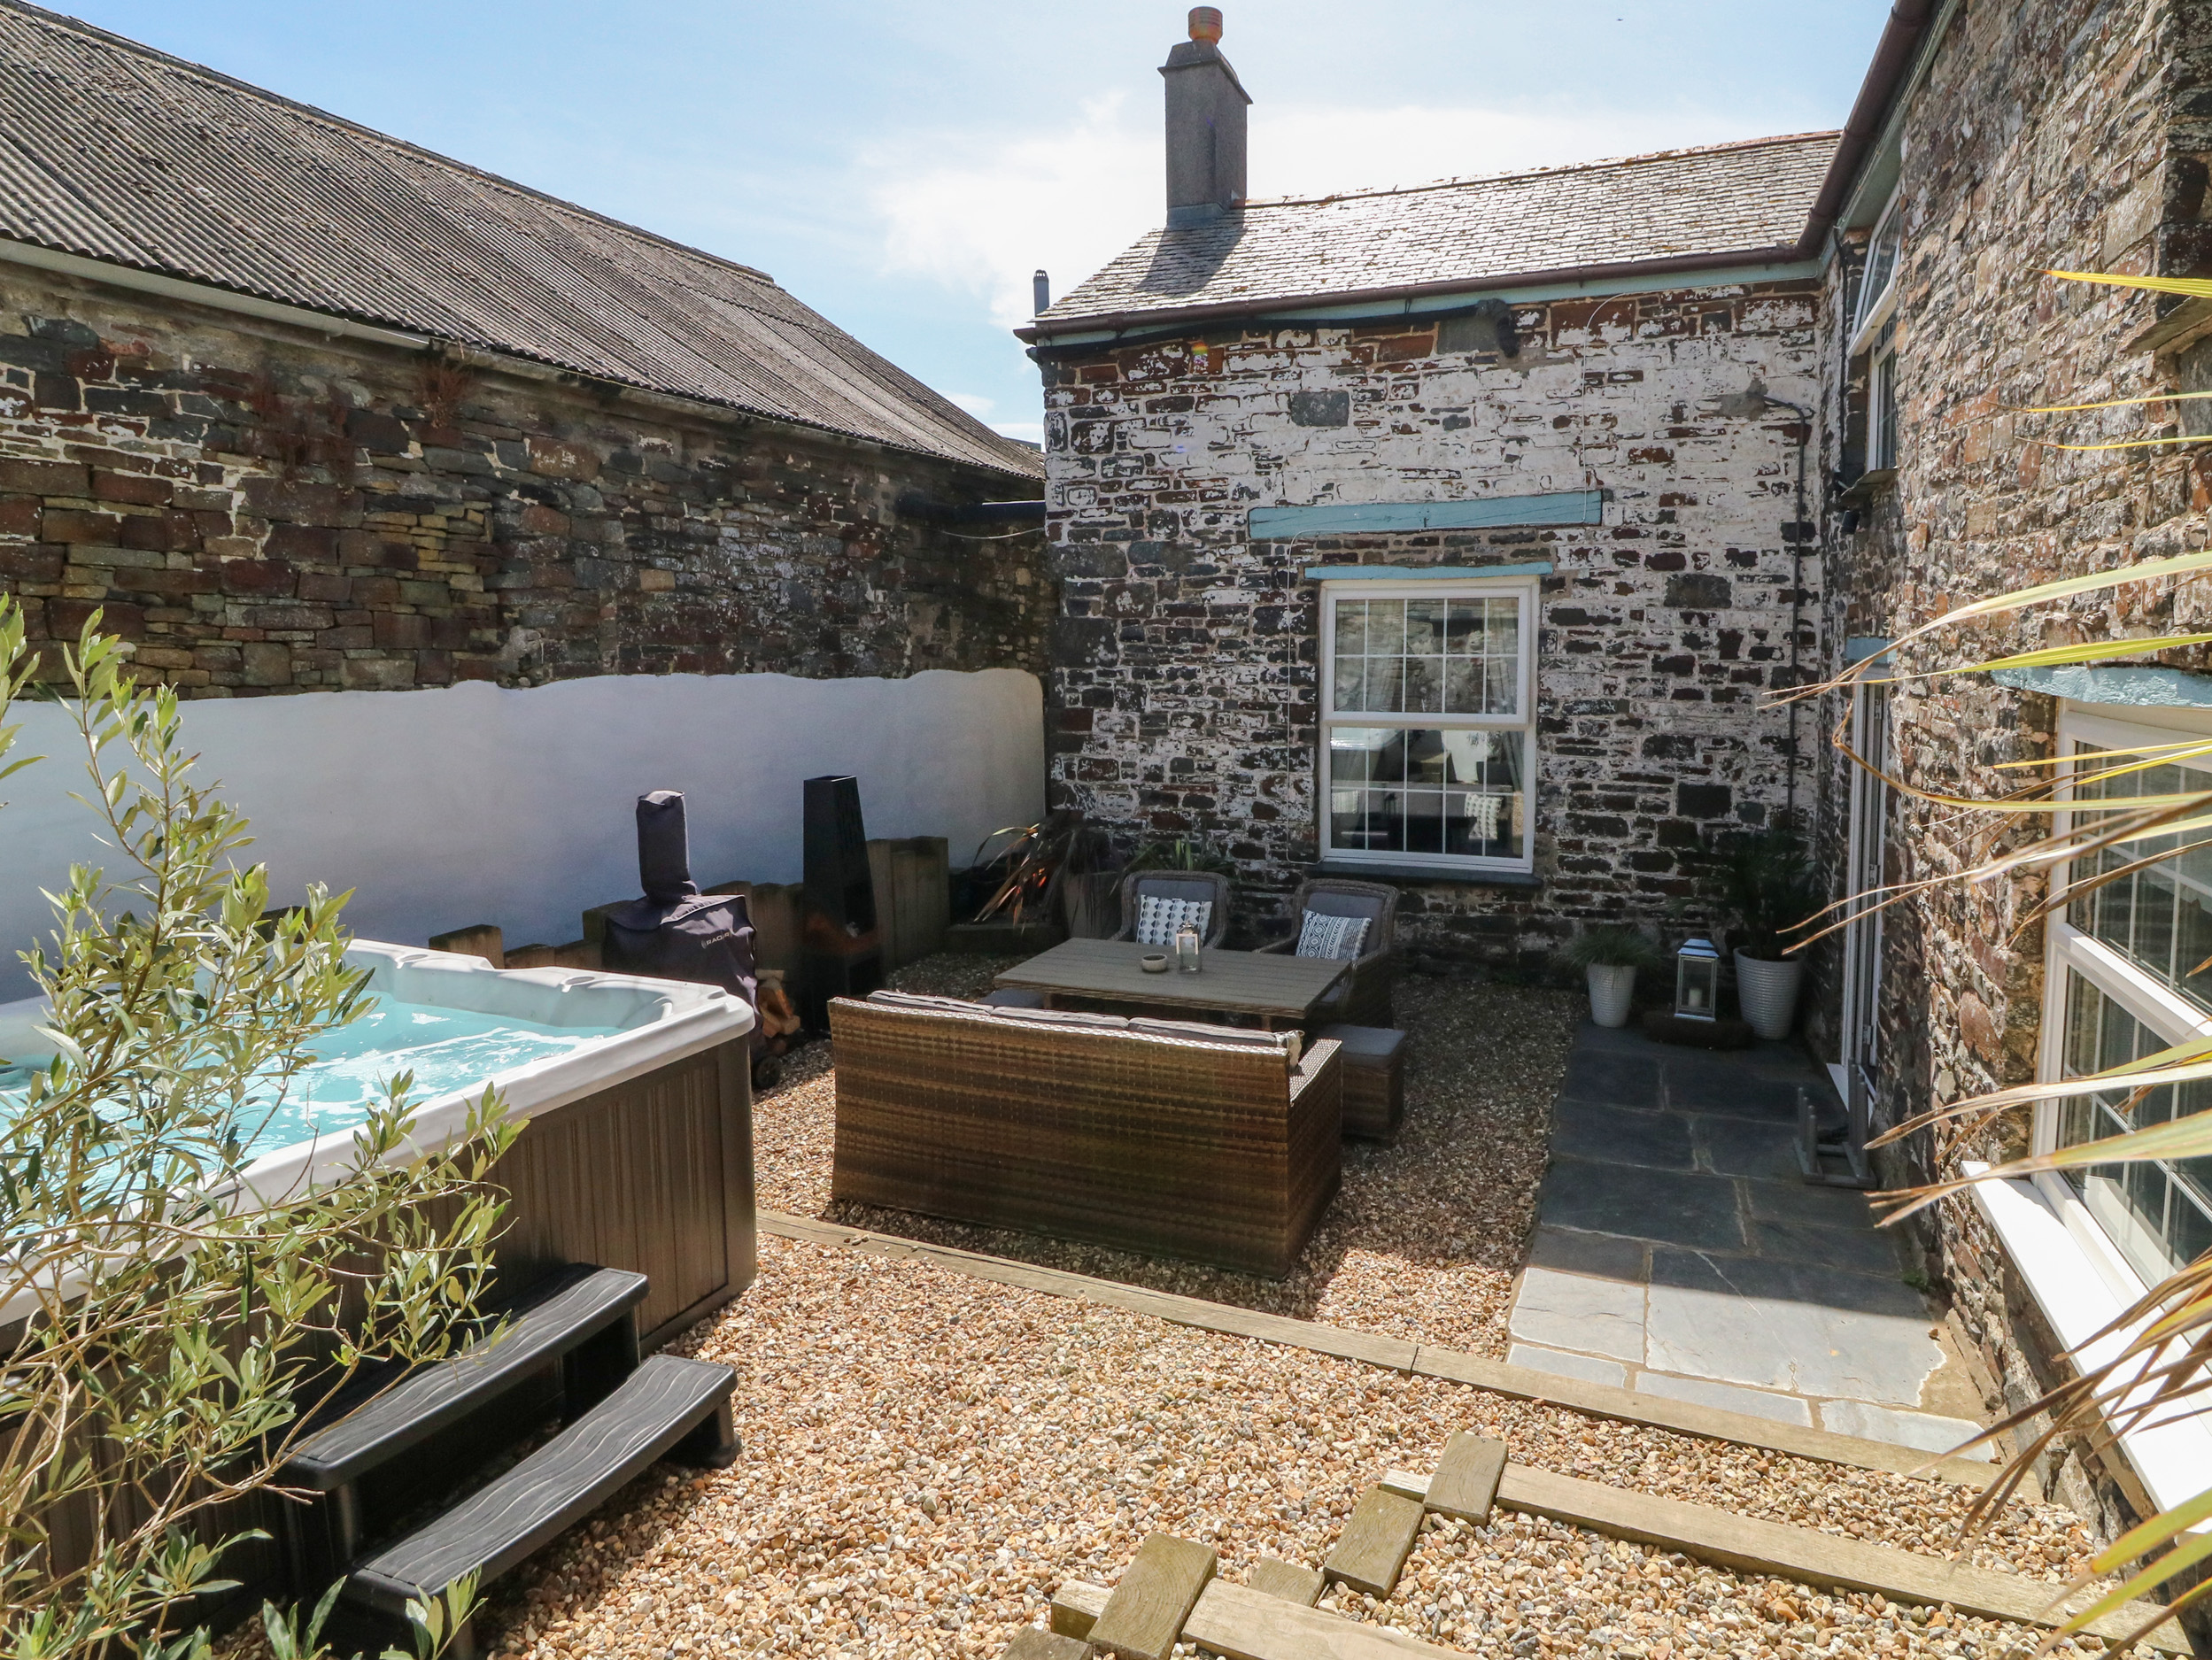 Puffin House, Hartland, Devon. 3-bedrooms. Remote situation. Farmhouse. Pet-friendly. Hot tub. WiFi.